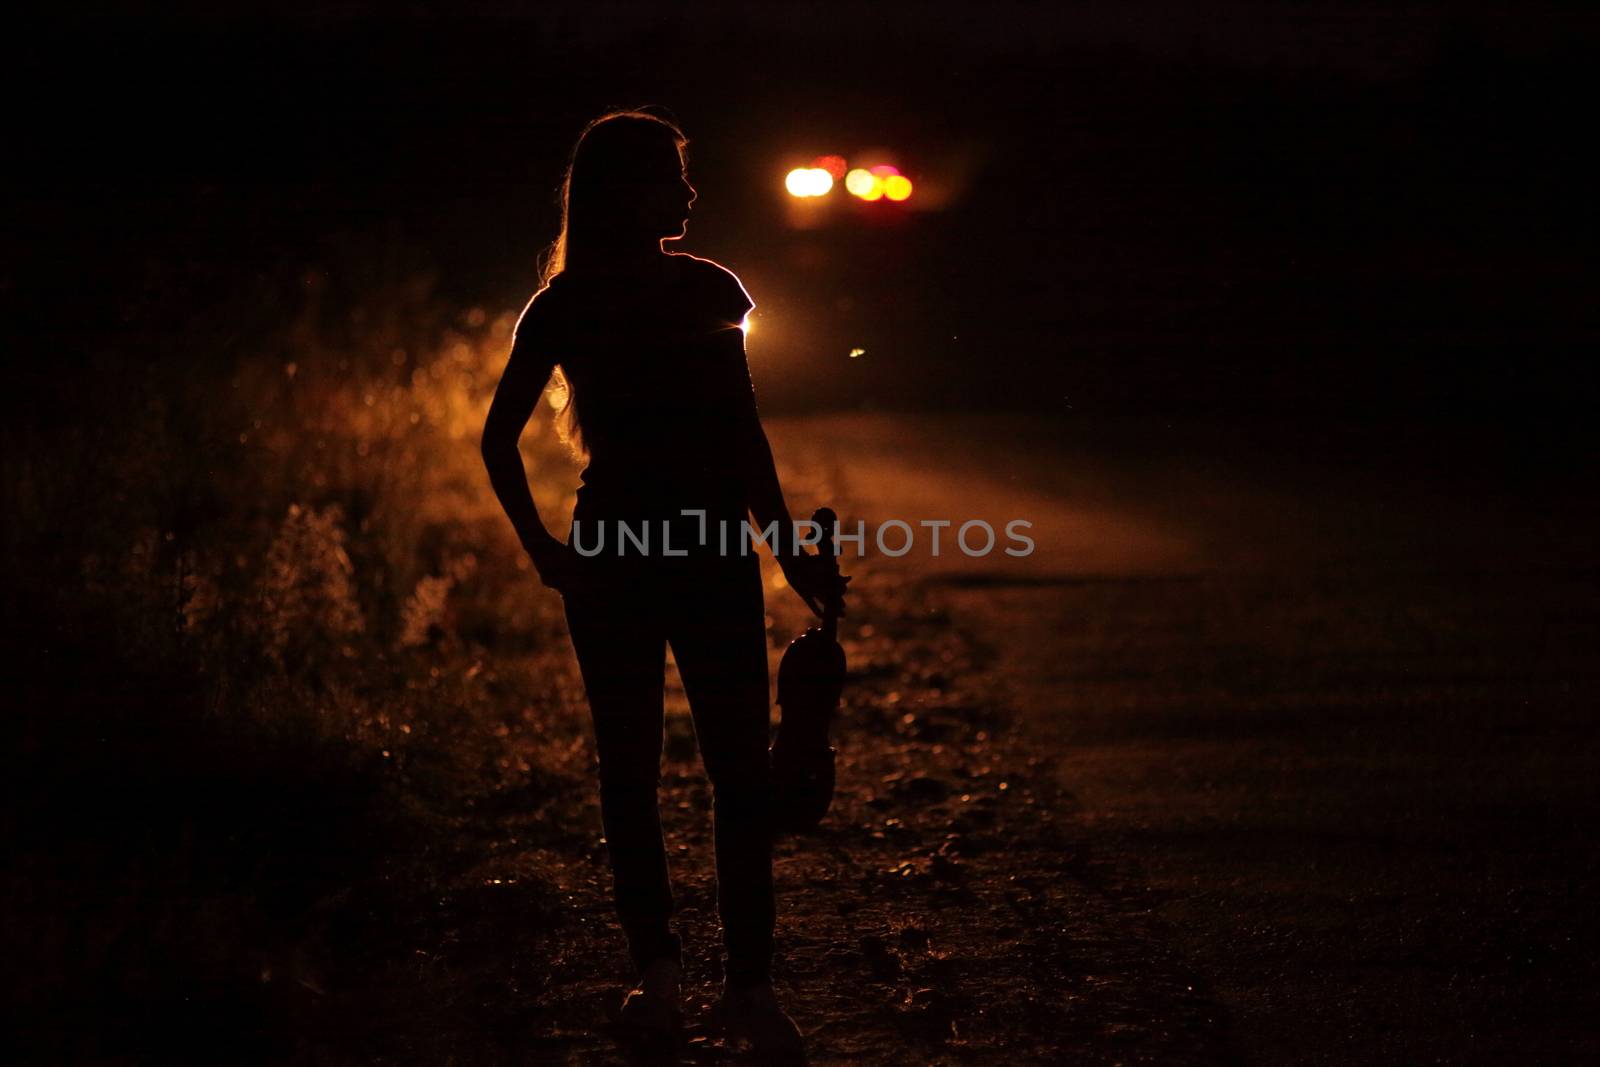 Silhouette of a slender young woman with violin in car headlights illumination. A young slender girl in the backlight of car headlights on the auto road at night. The girl is hitchhiking.